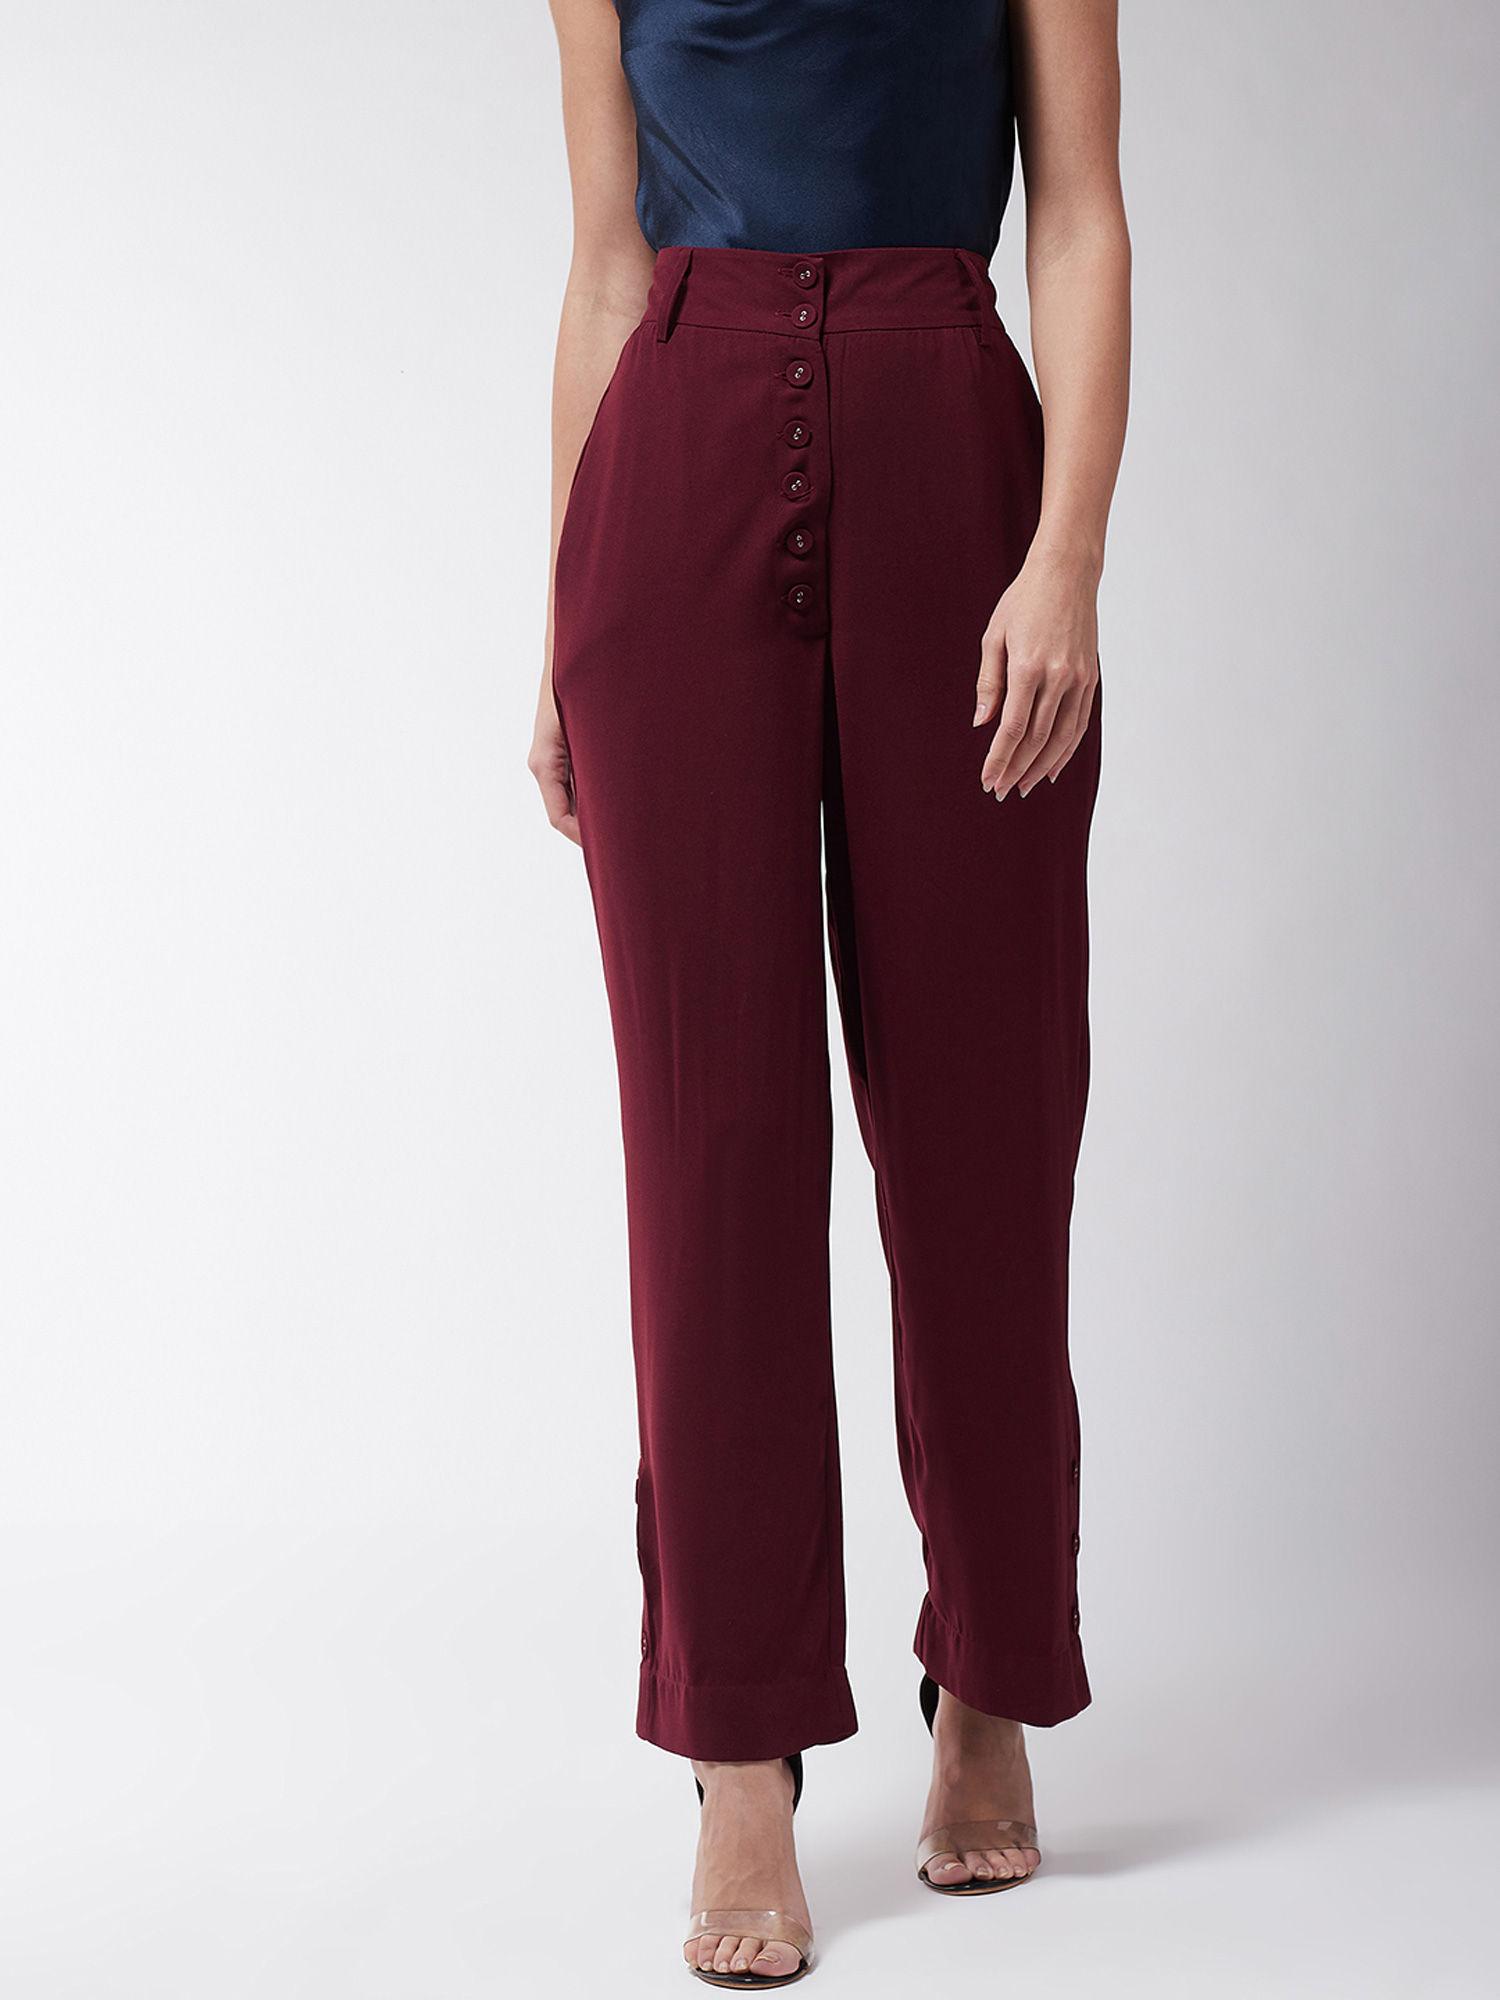 maroon front buttons pants